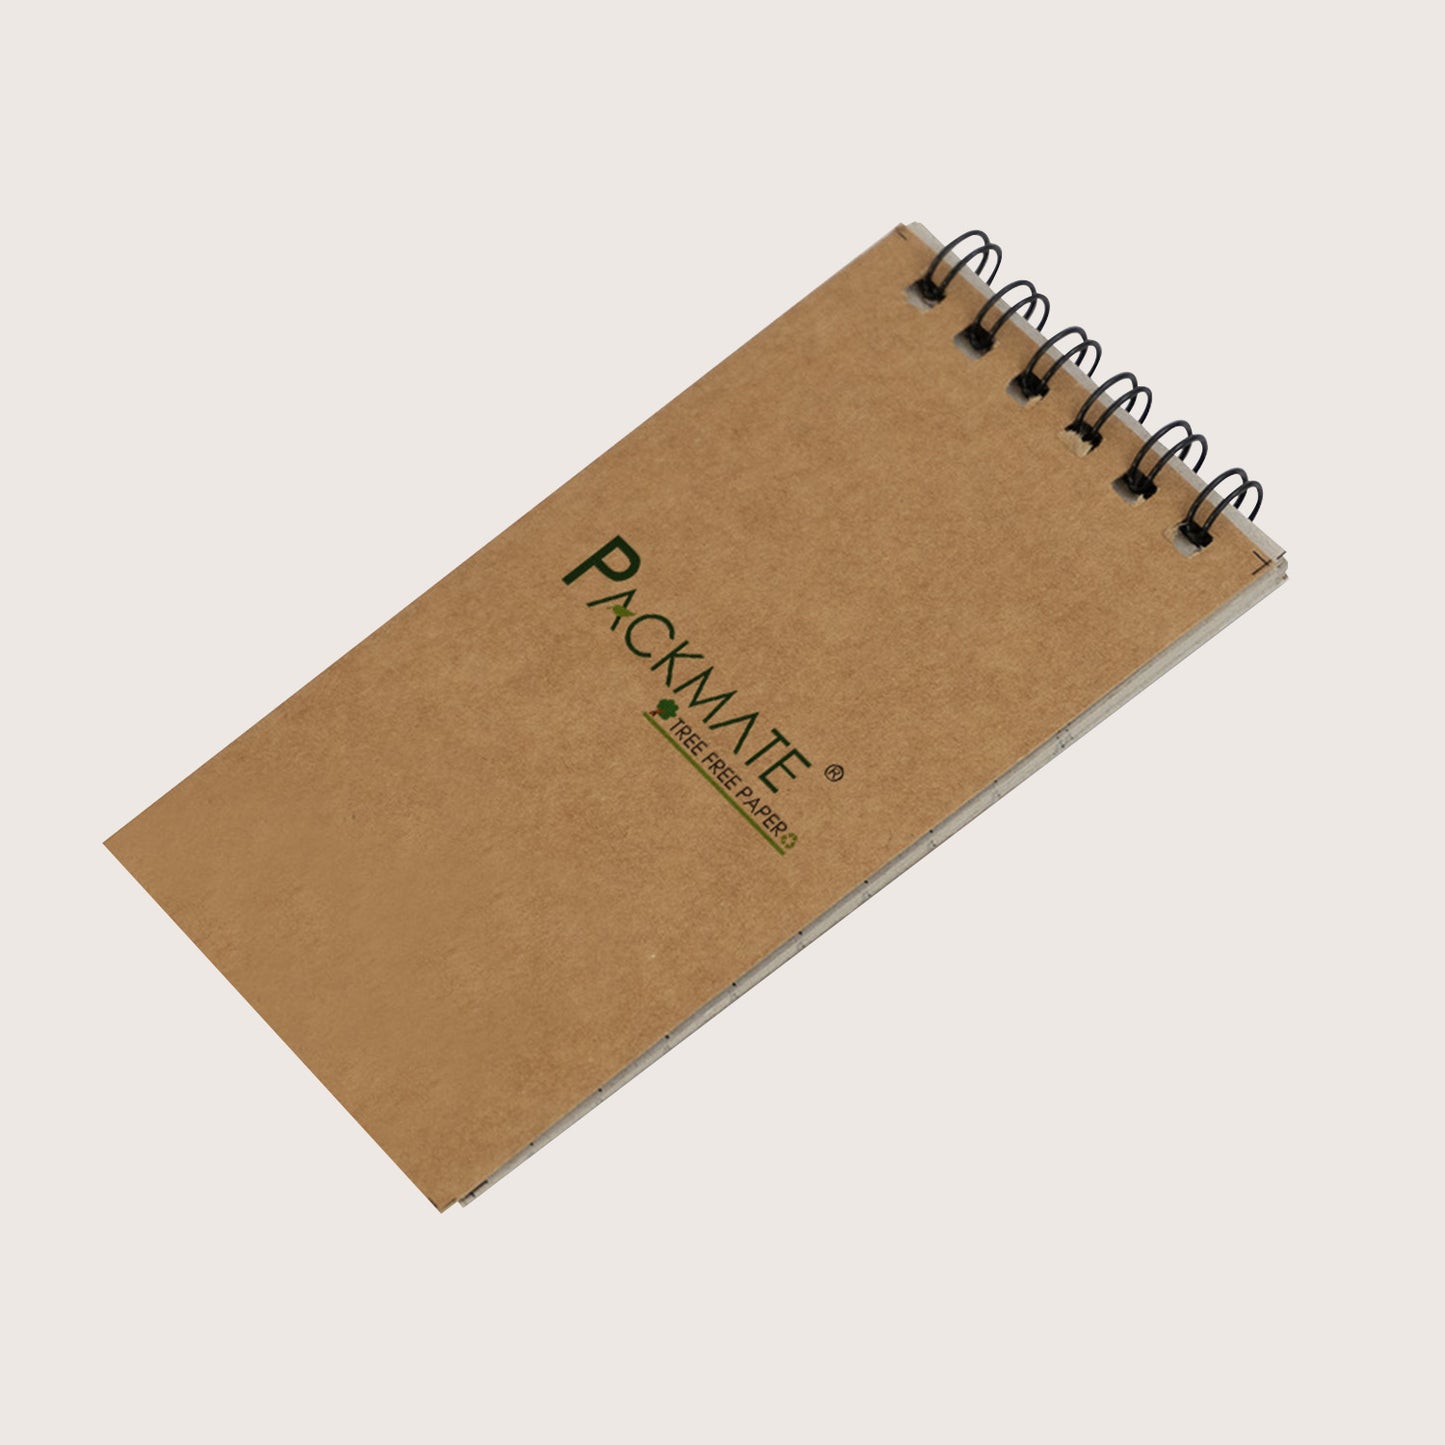 Packmate Ruled Pocket Diary | Pack of 10 | Made from 100% Recycled Paper